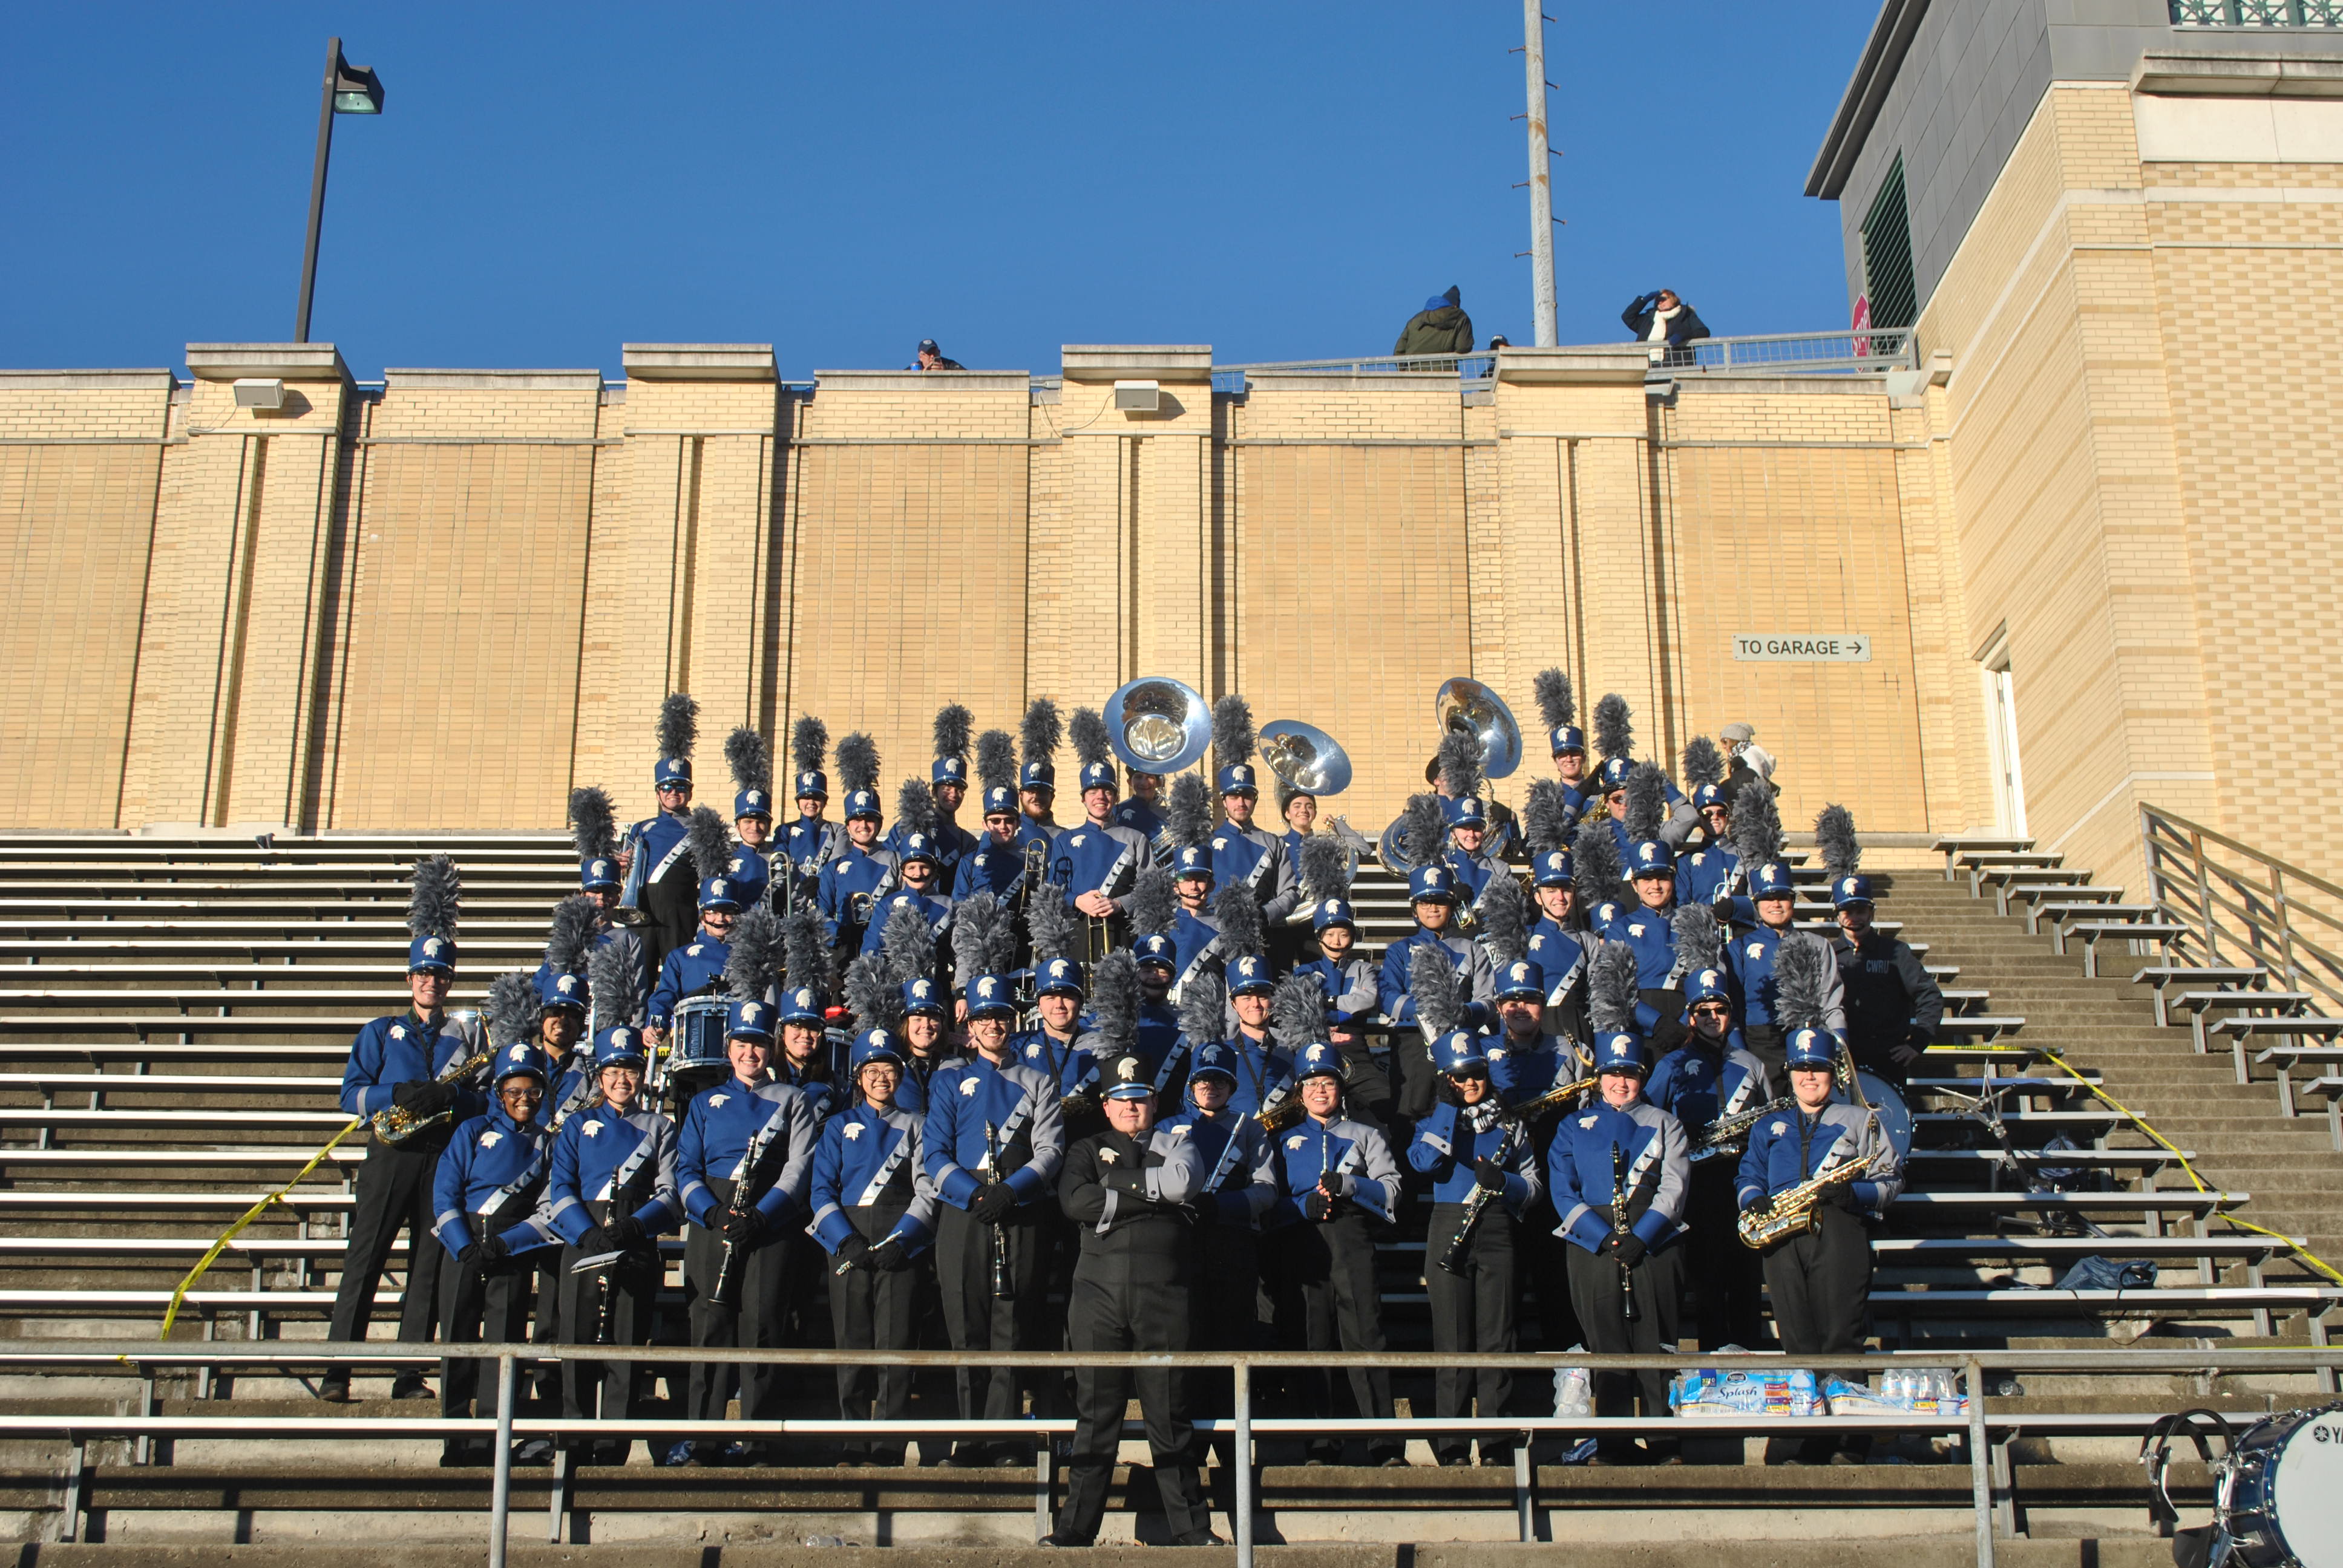 Spartan Marching Band in uniform in the stands at the football stadium.